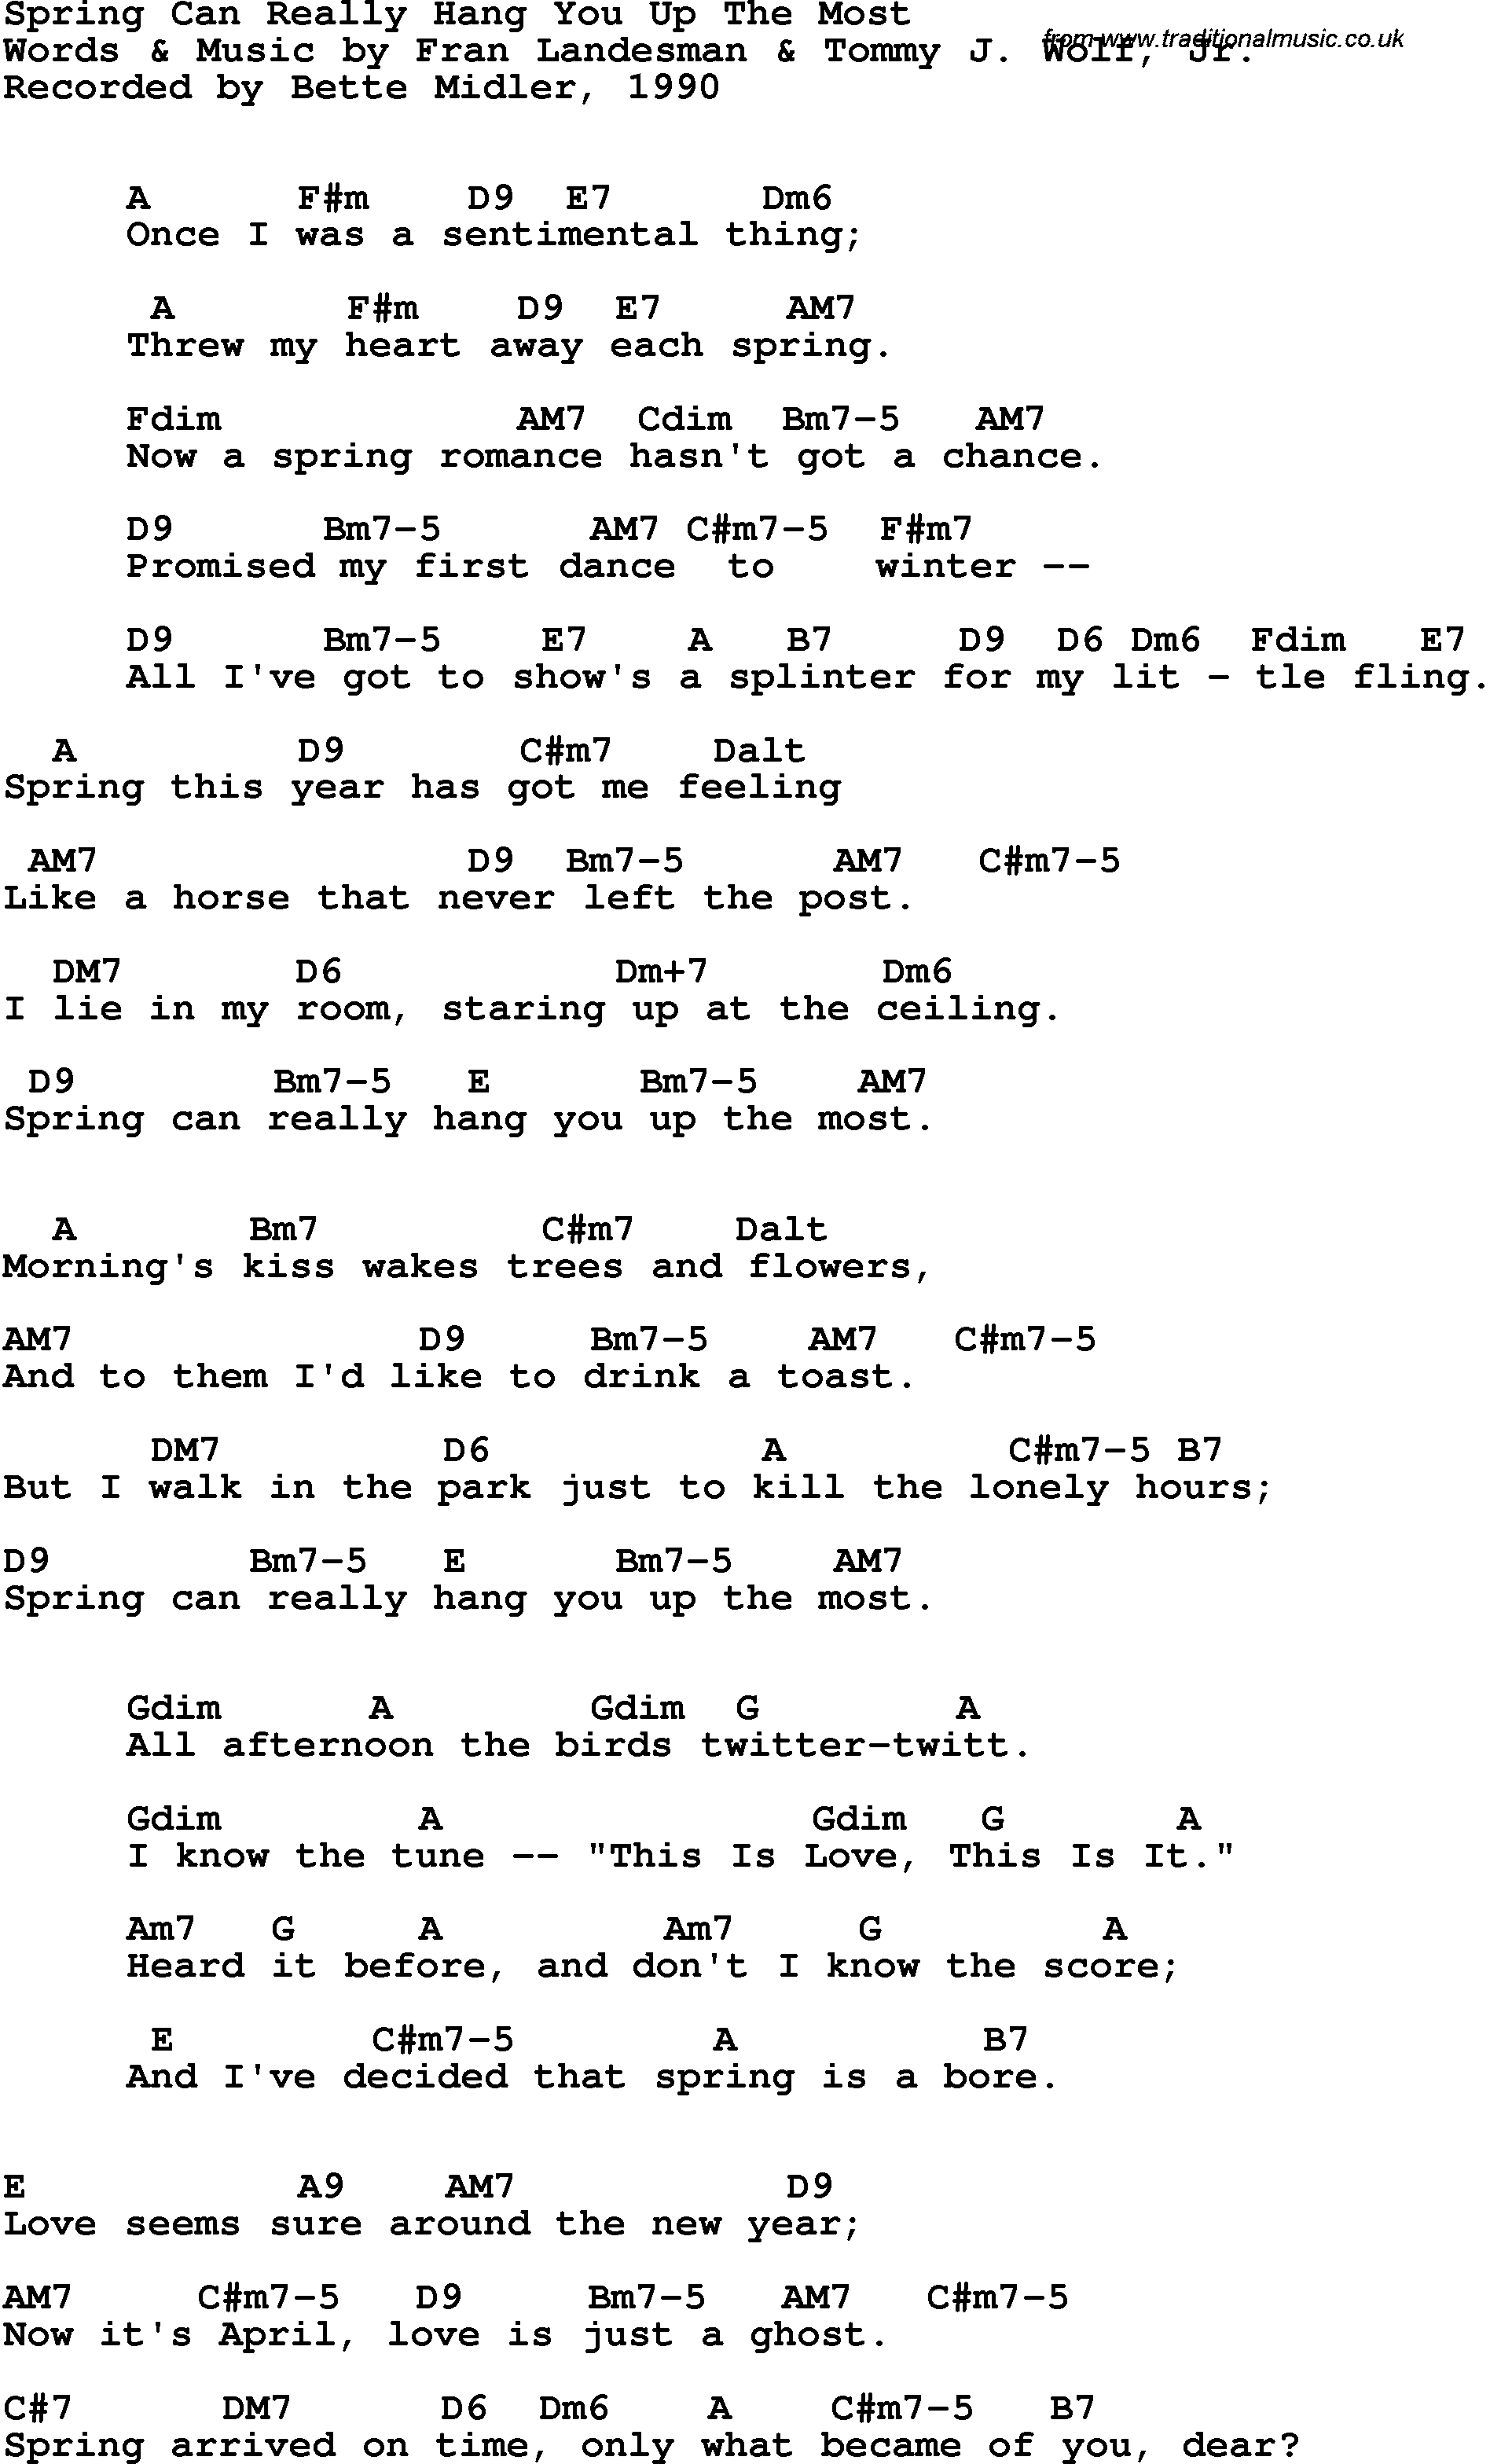 Song Lyrics with guitar chords for Spring Can Really Hang You Up The Most - Bette Midler, 1990